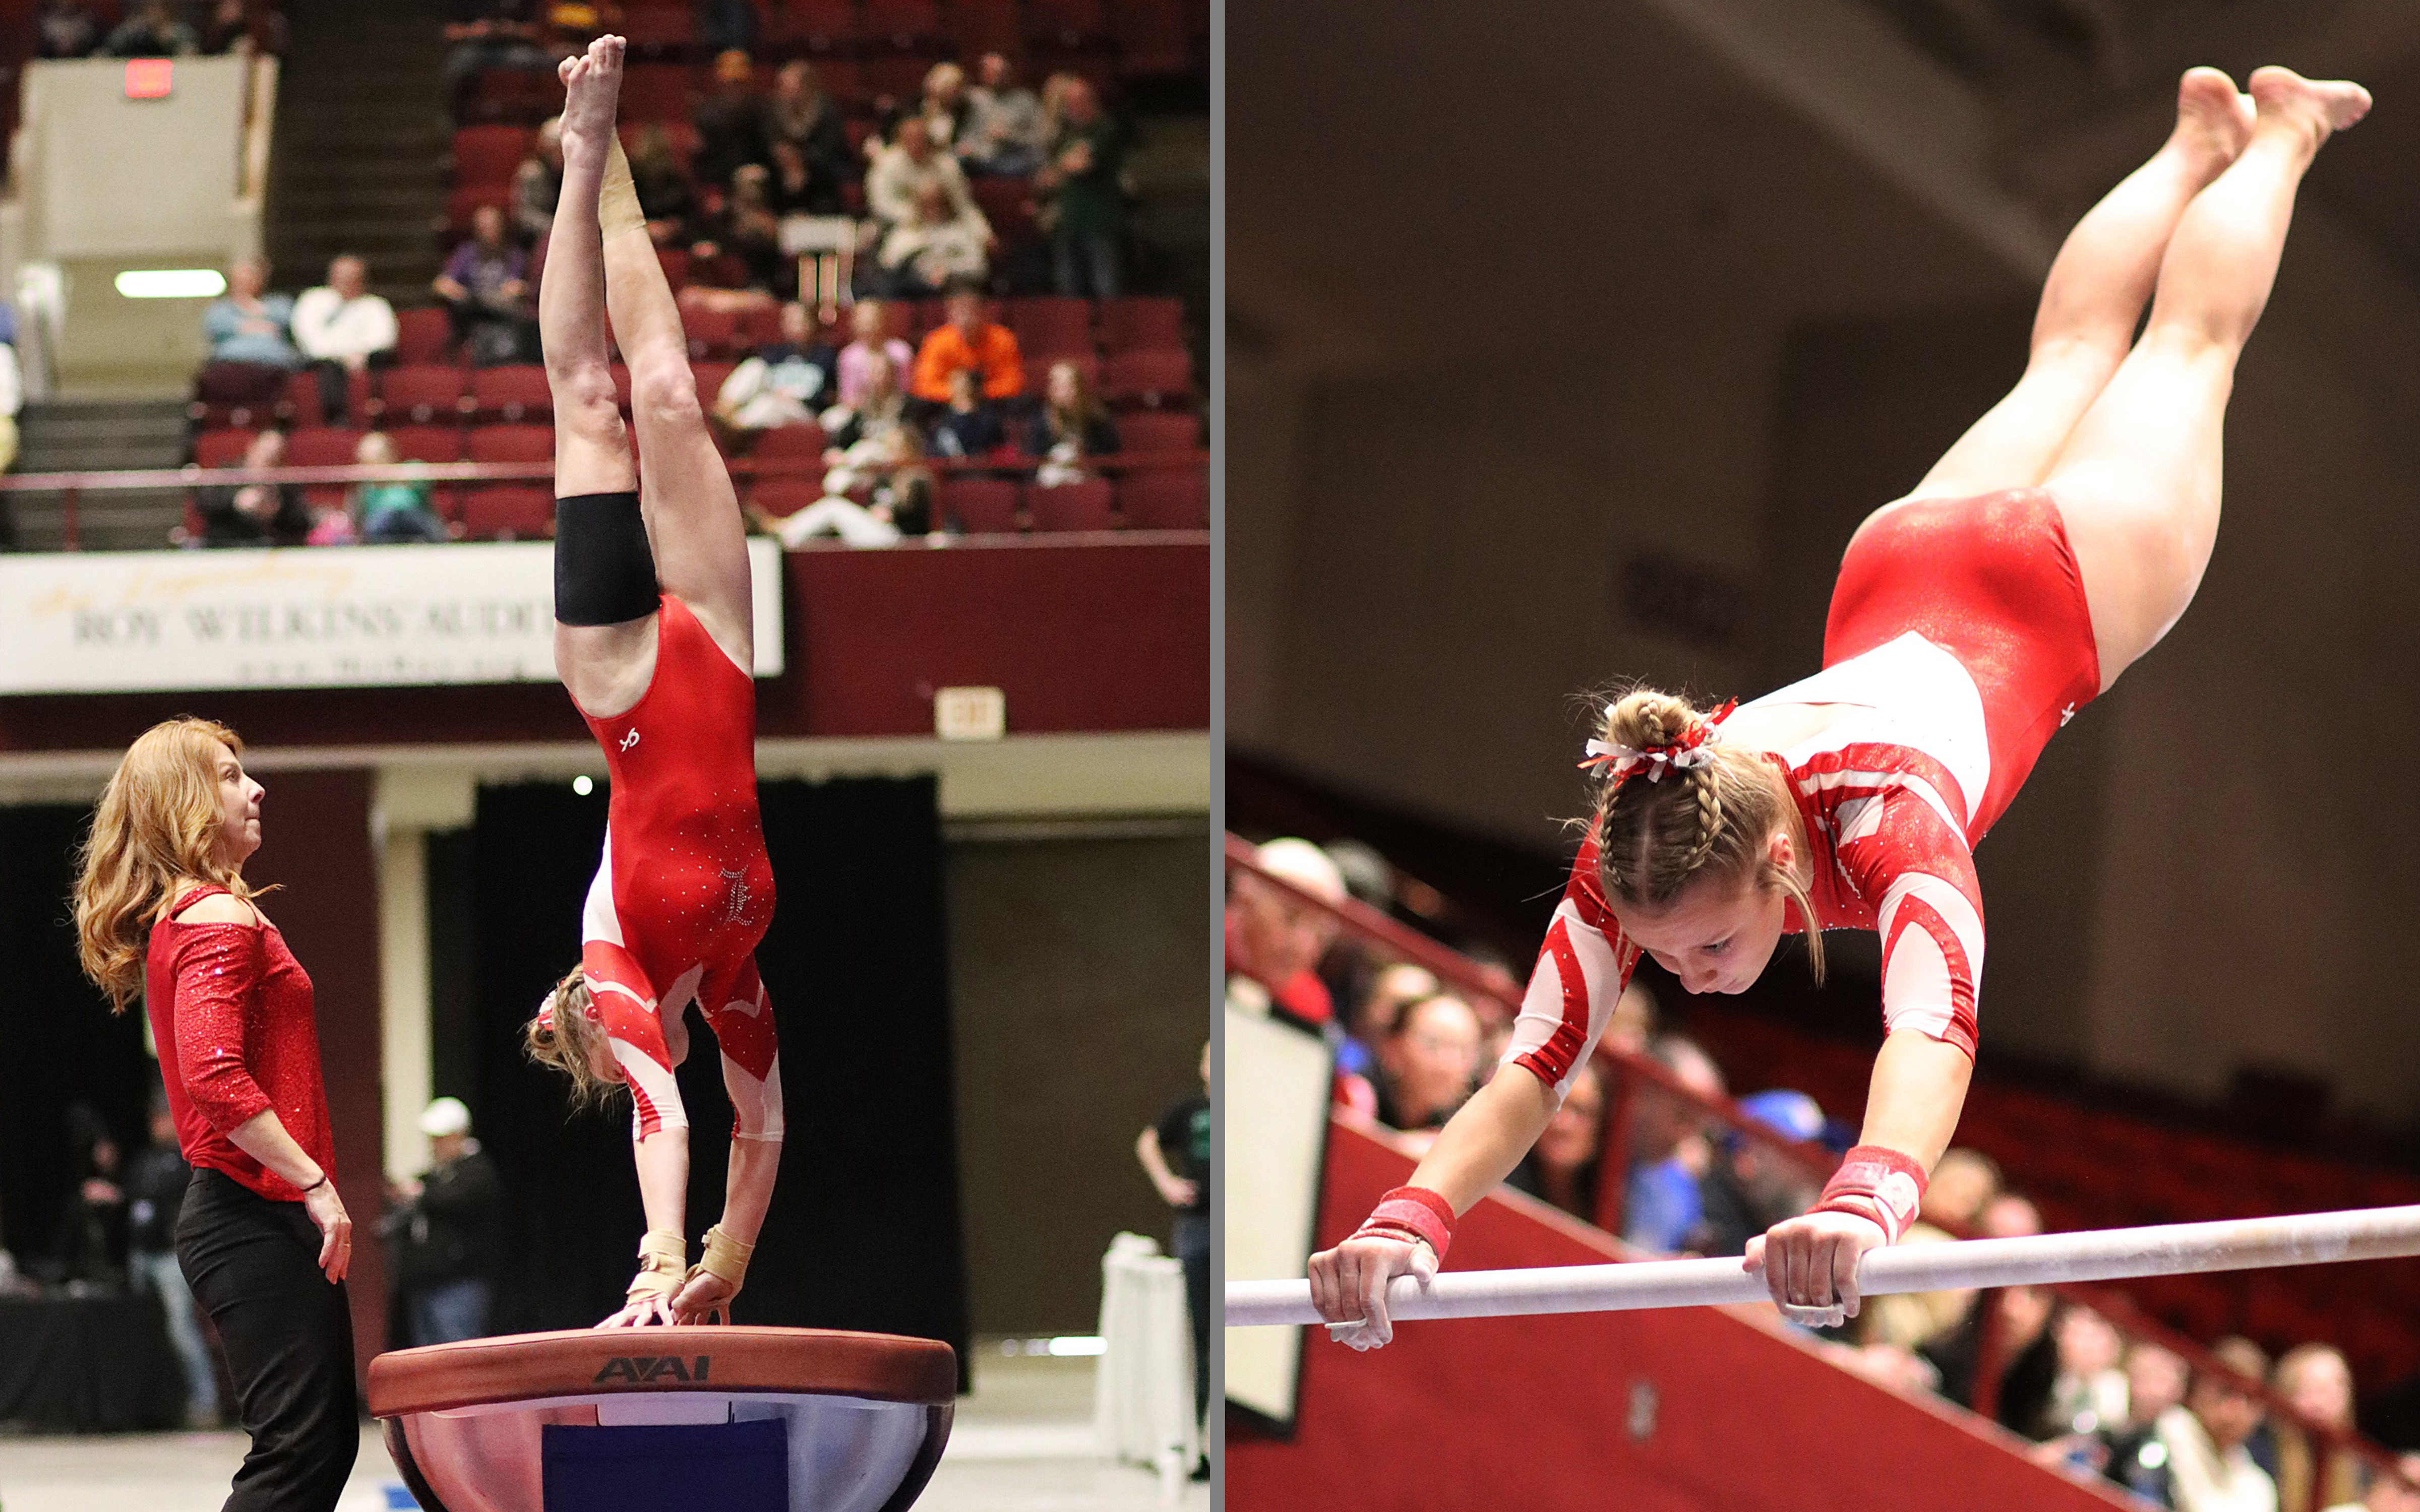 LHS junior Ella Reisdorfer (right) performs on the uneven bars at the state individual gymnastics meet Friday, Feb. 23. This was Reisdorfer’s fifth appearance at state on the bars. LHS junior Amira Cowell (left) performs on the vault at the Roy Wilkins Auditorium in St. Paul. Cowell scored a 9.2875 good for 20th place in the event.